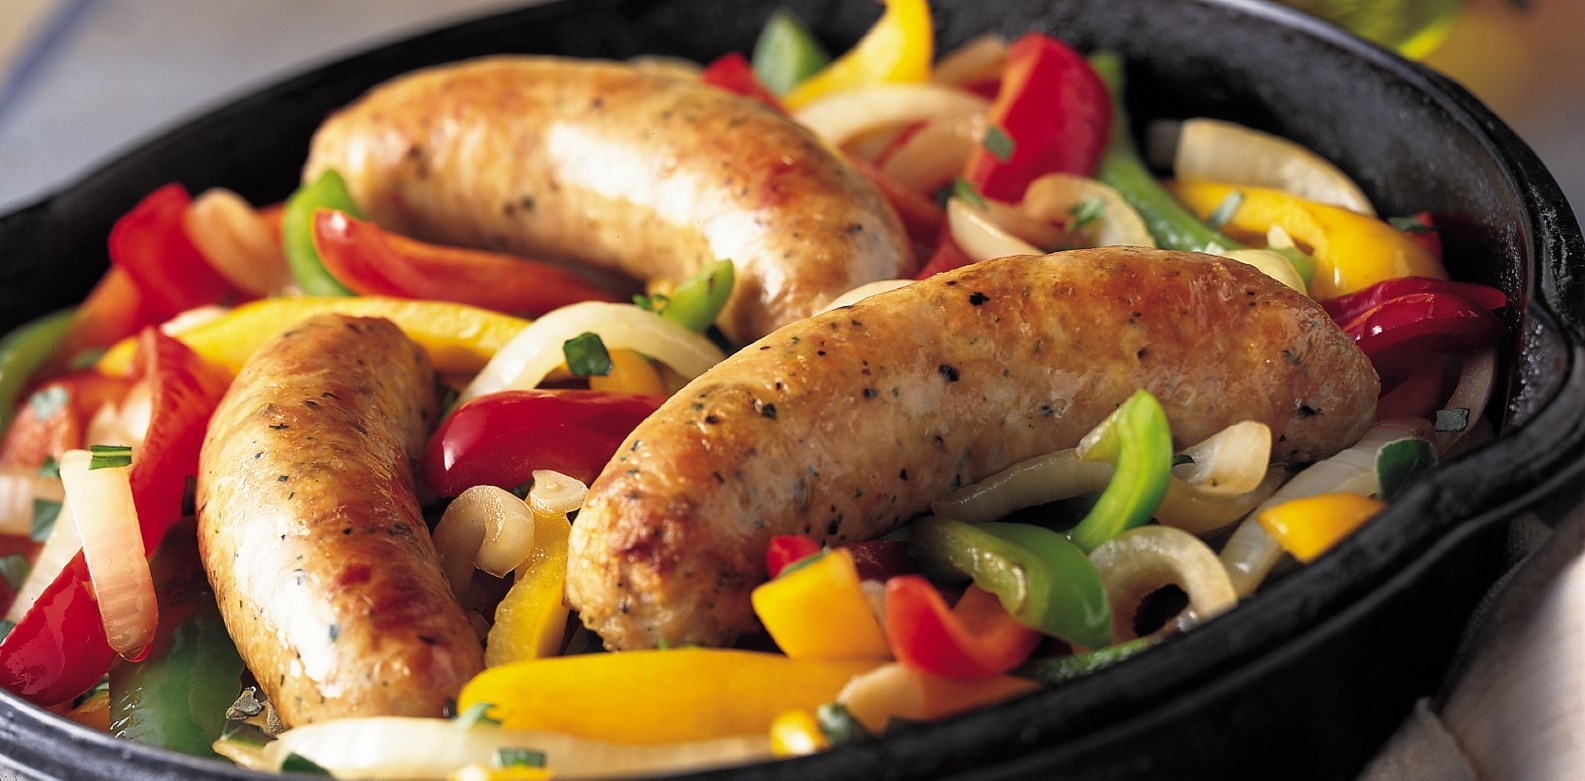 Skillet with Sausage